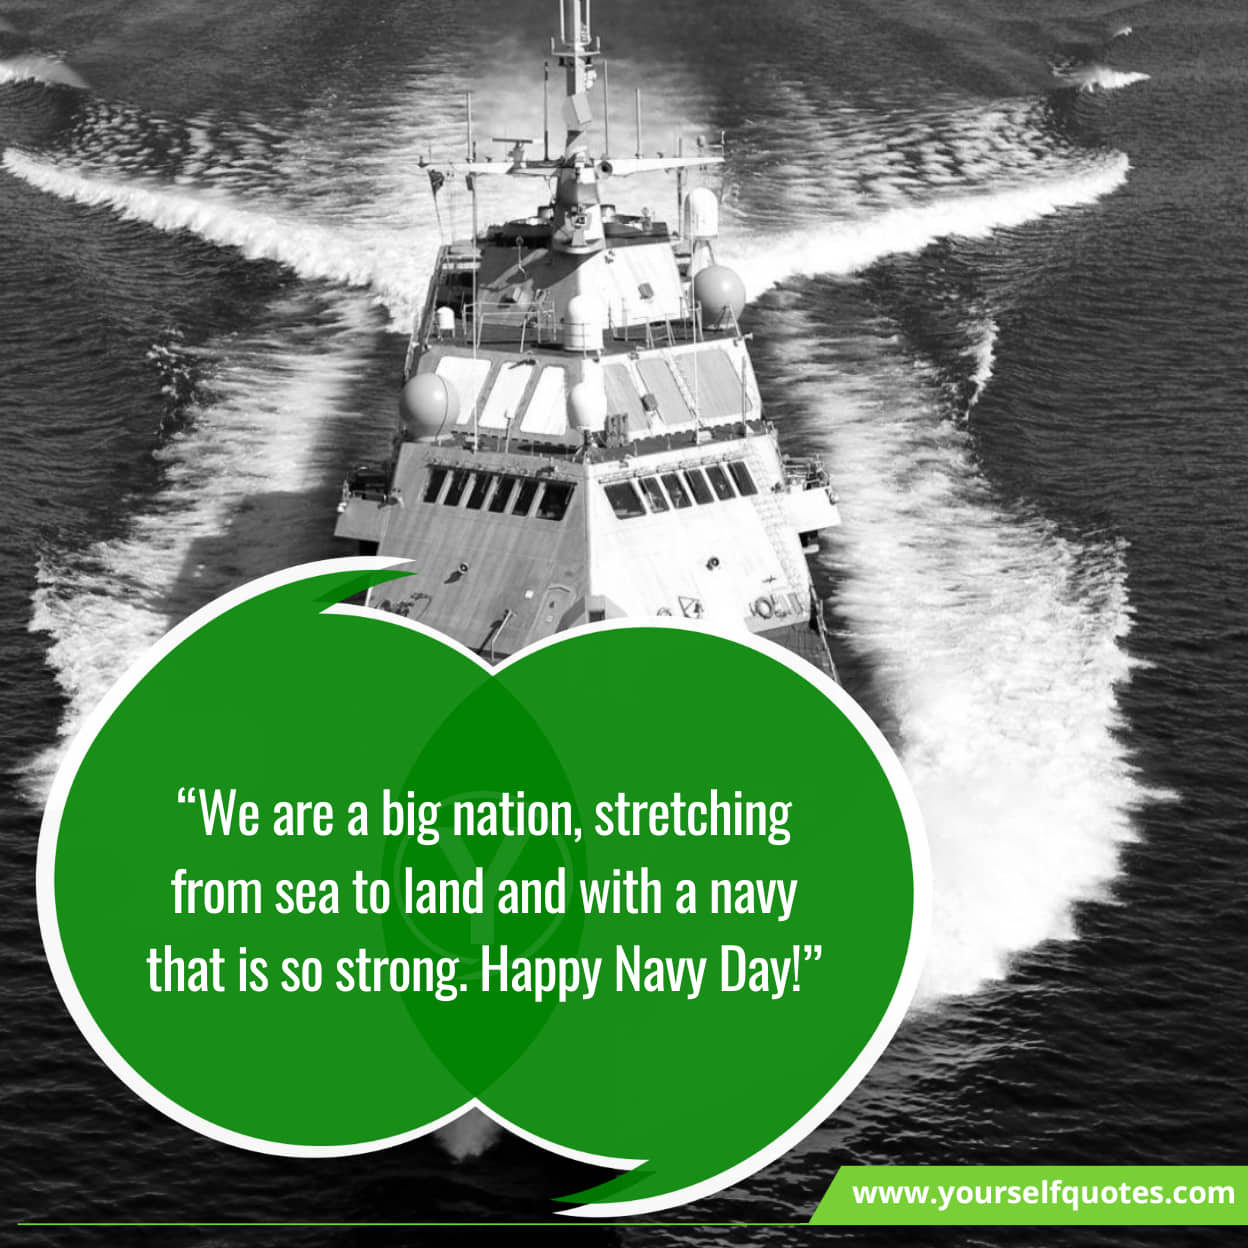 Indian Navy Day tributes and remembrances